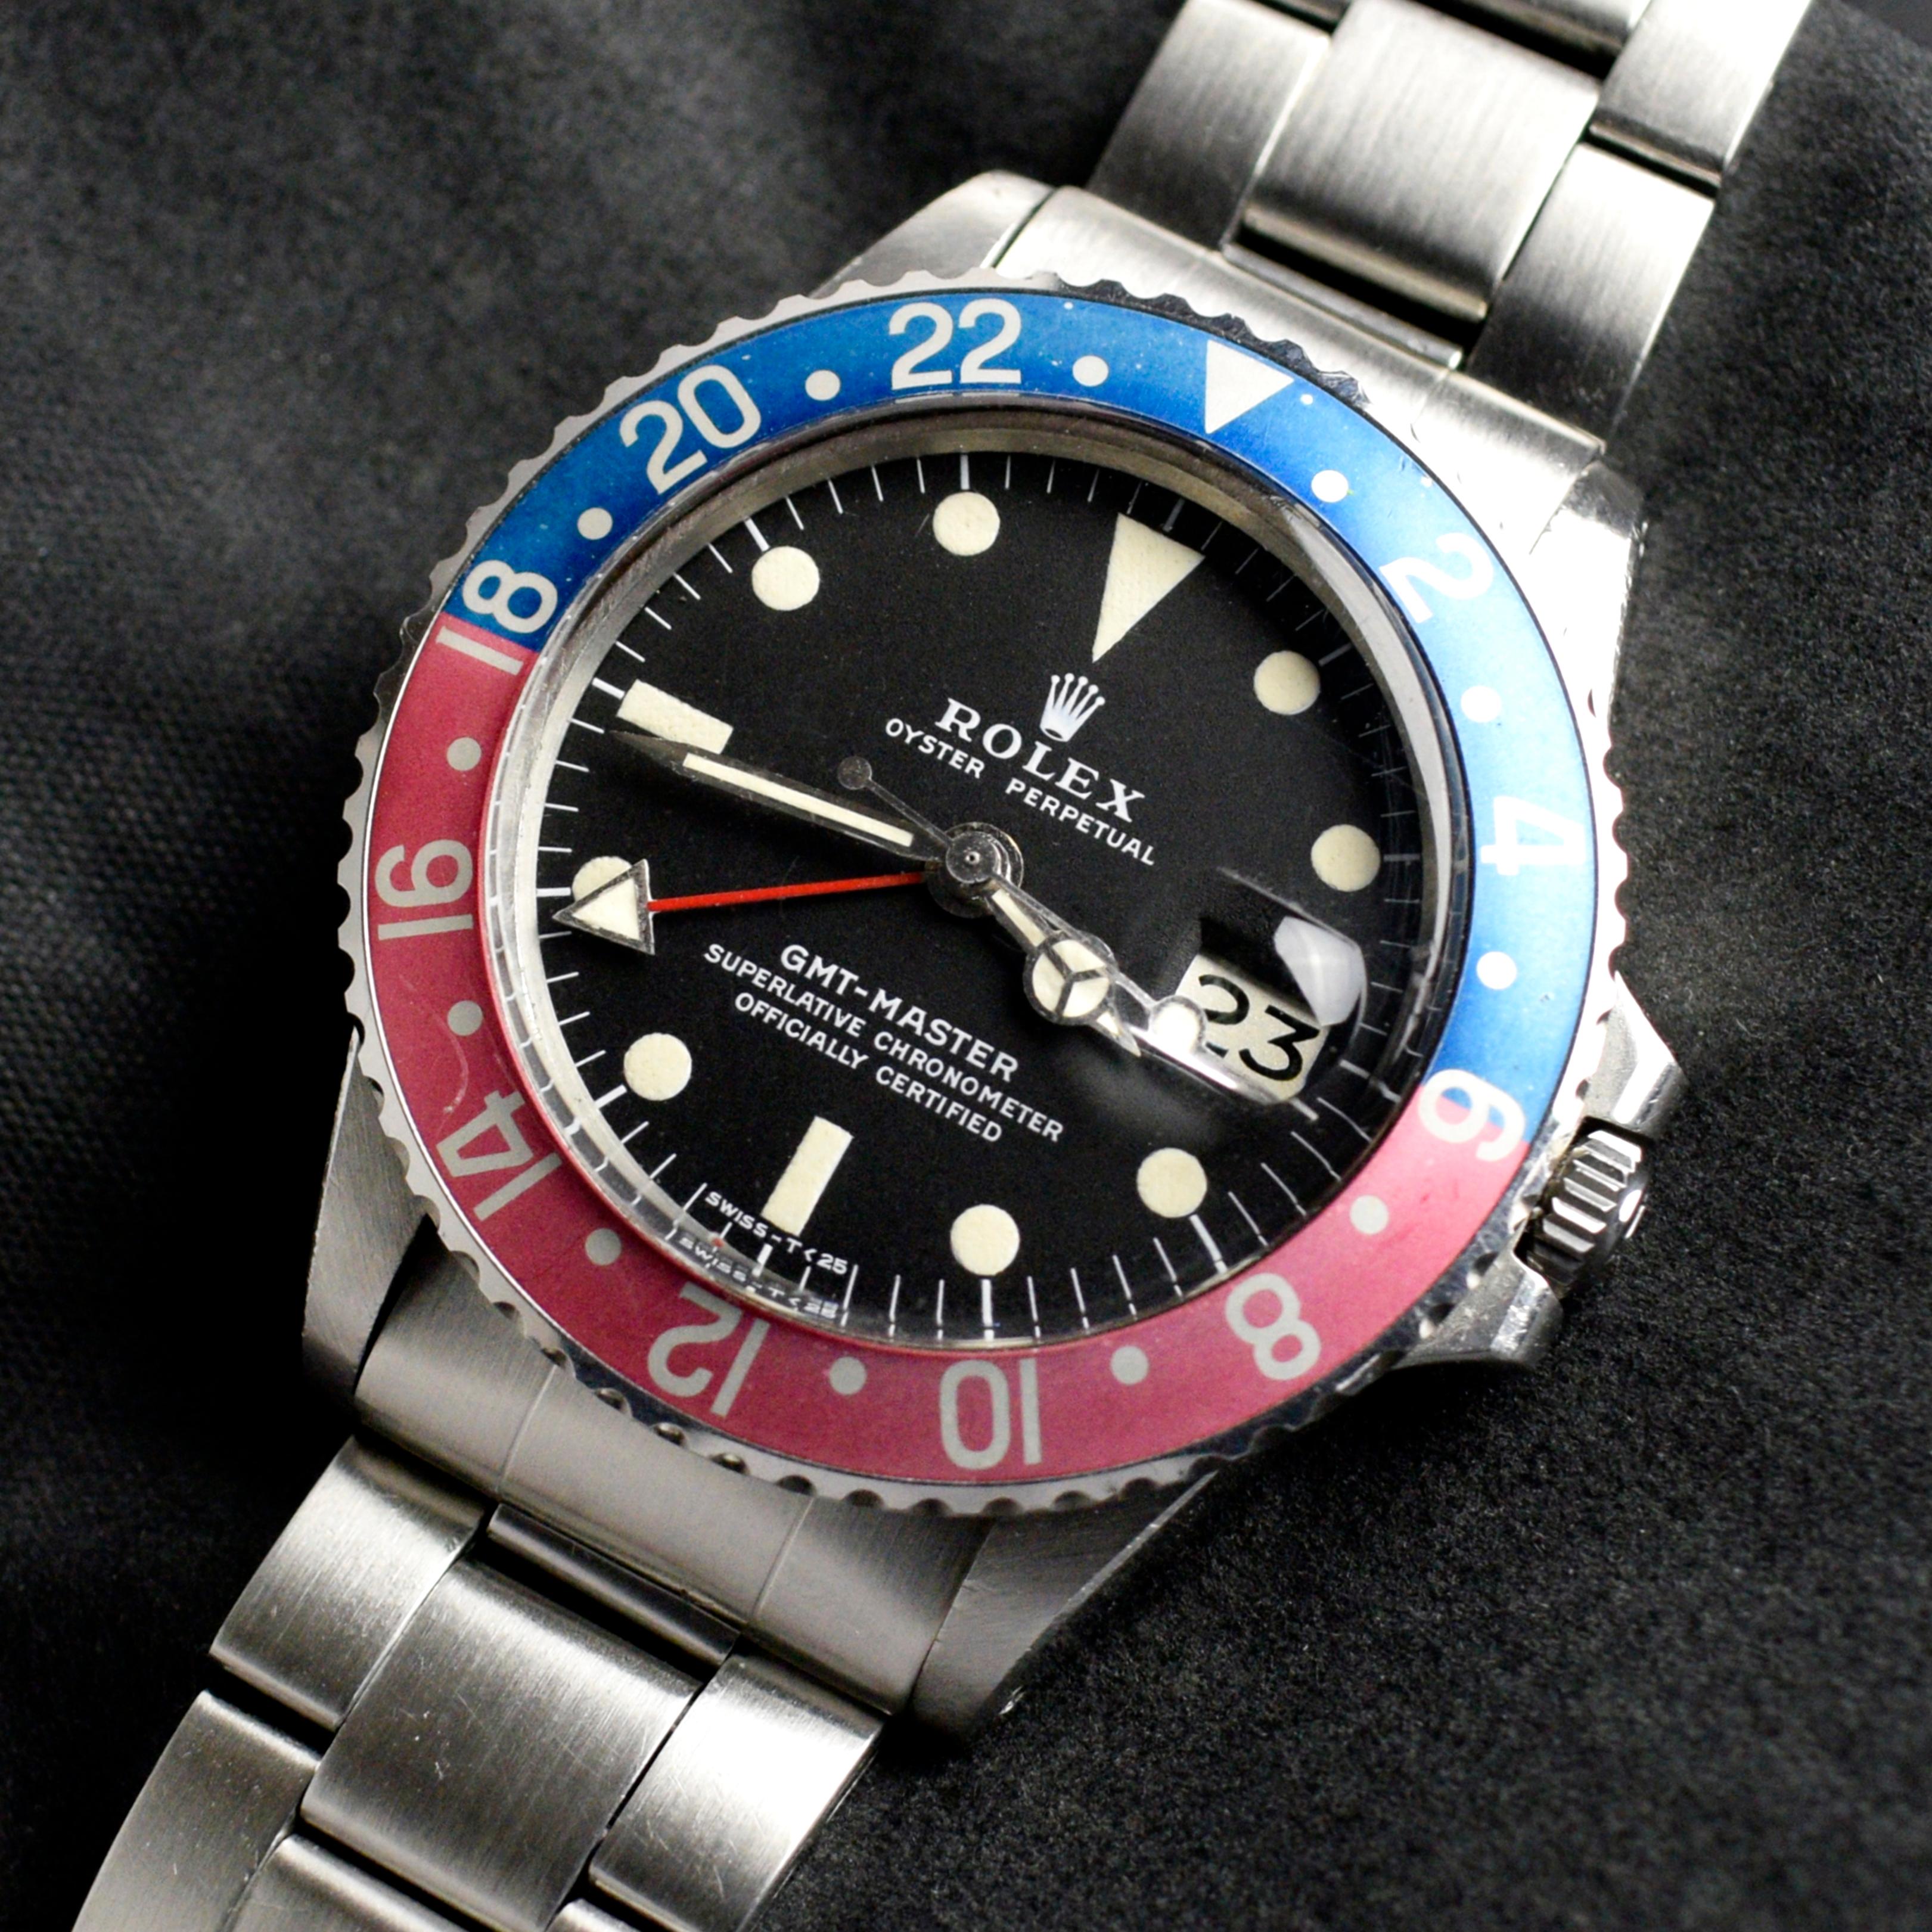 Brand: Vintage Rolex
Model: 1675
Year: 1972
Serial number: 32xxxxx
Reference: C03758; C03759

Case: Show sign of wear with slight polish from previous; inner case back stamped 1675 III.72

Dial: Excellent Clean Condition Tritium Dial where the lumes